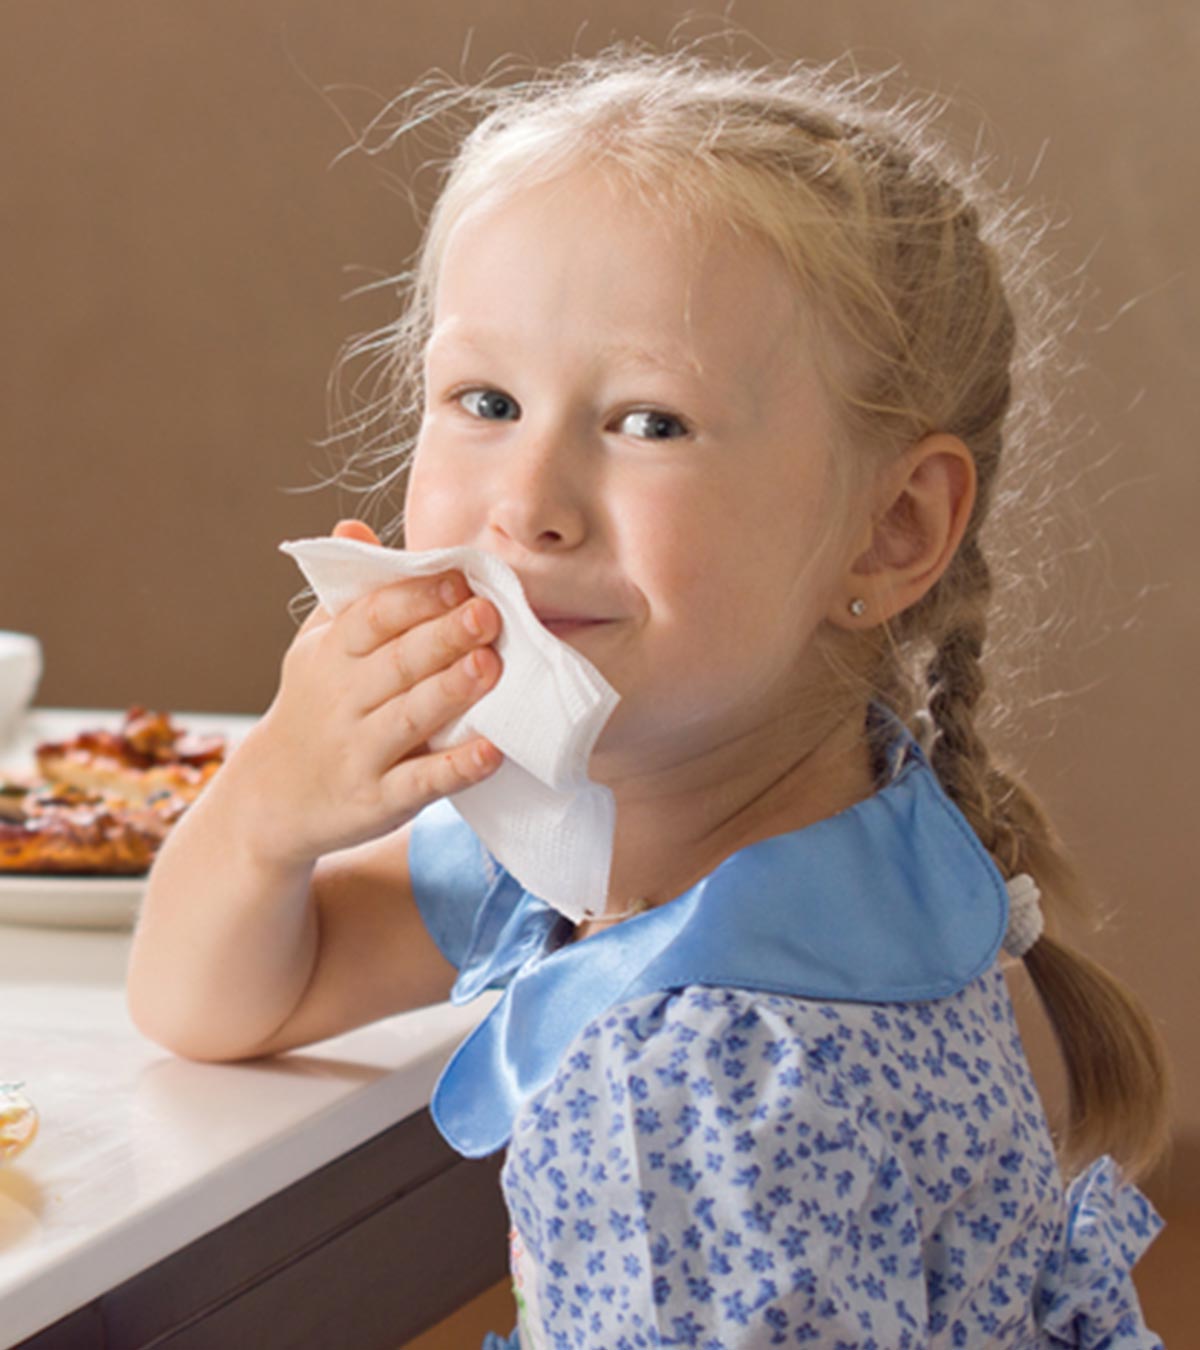 15+ Table Manners For Kids Of Every Age To Learn And Follow